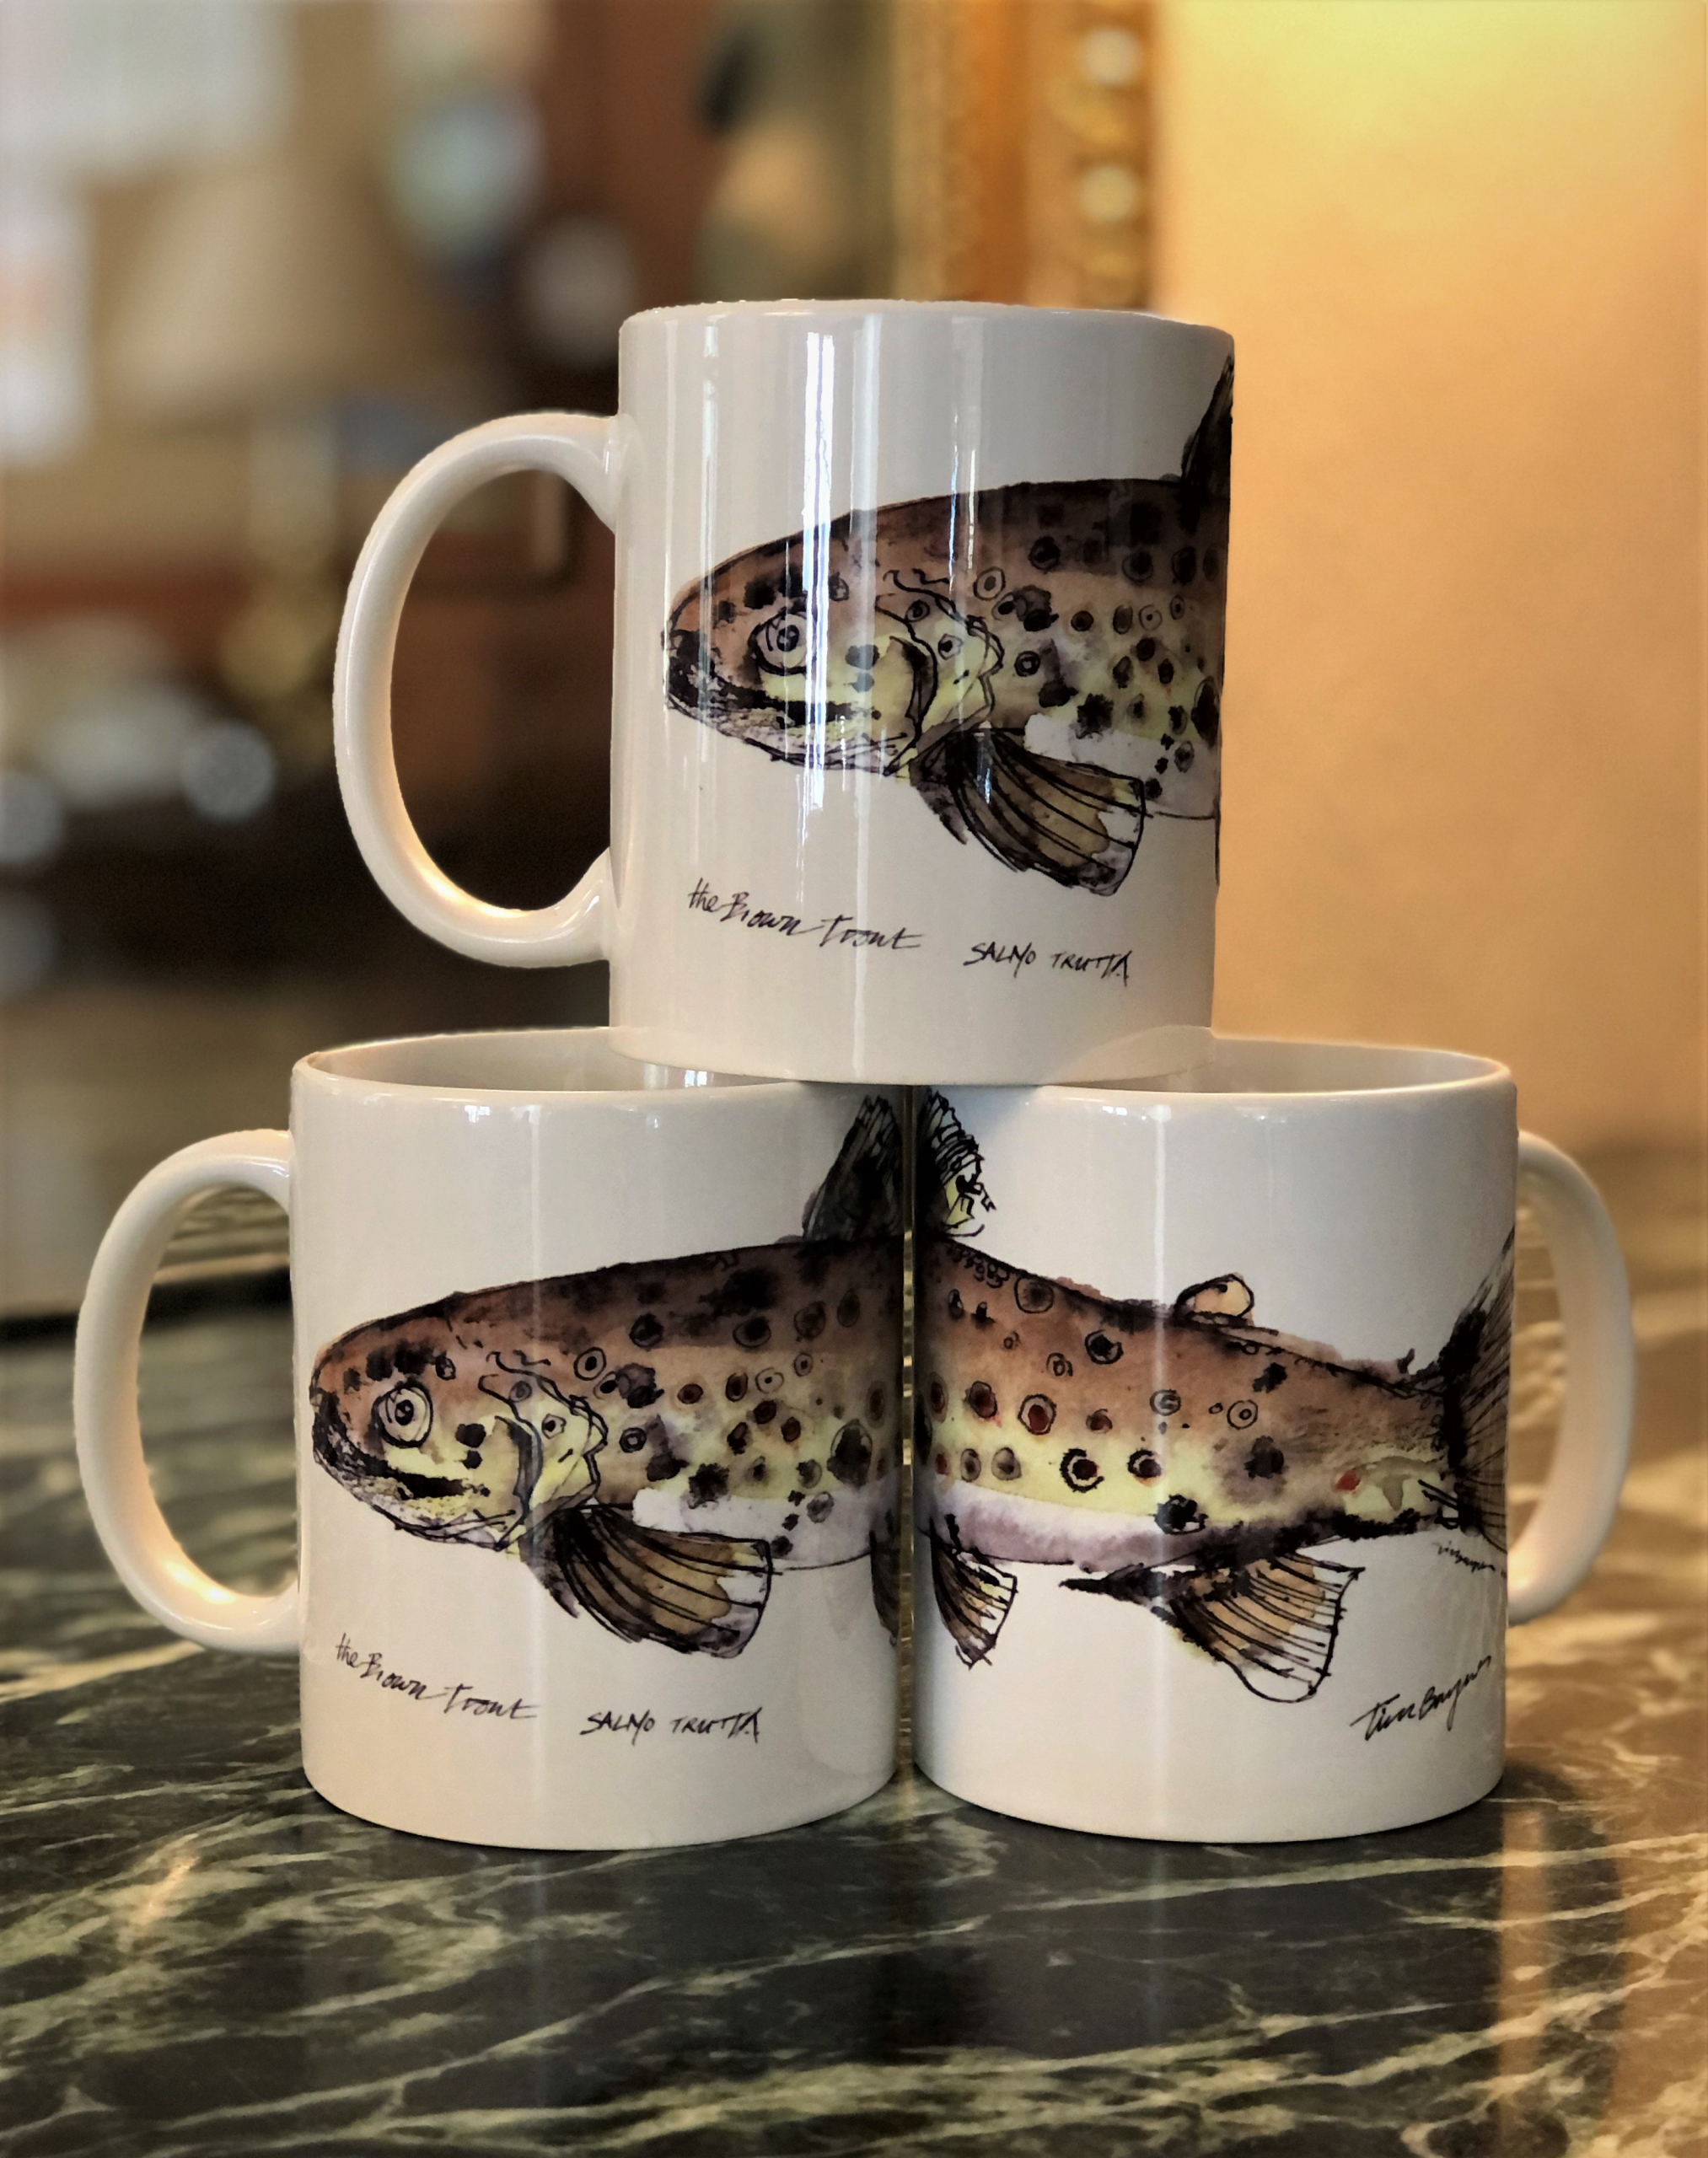 Brown Trout Mug - Scourie Hotel